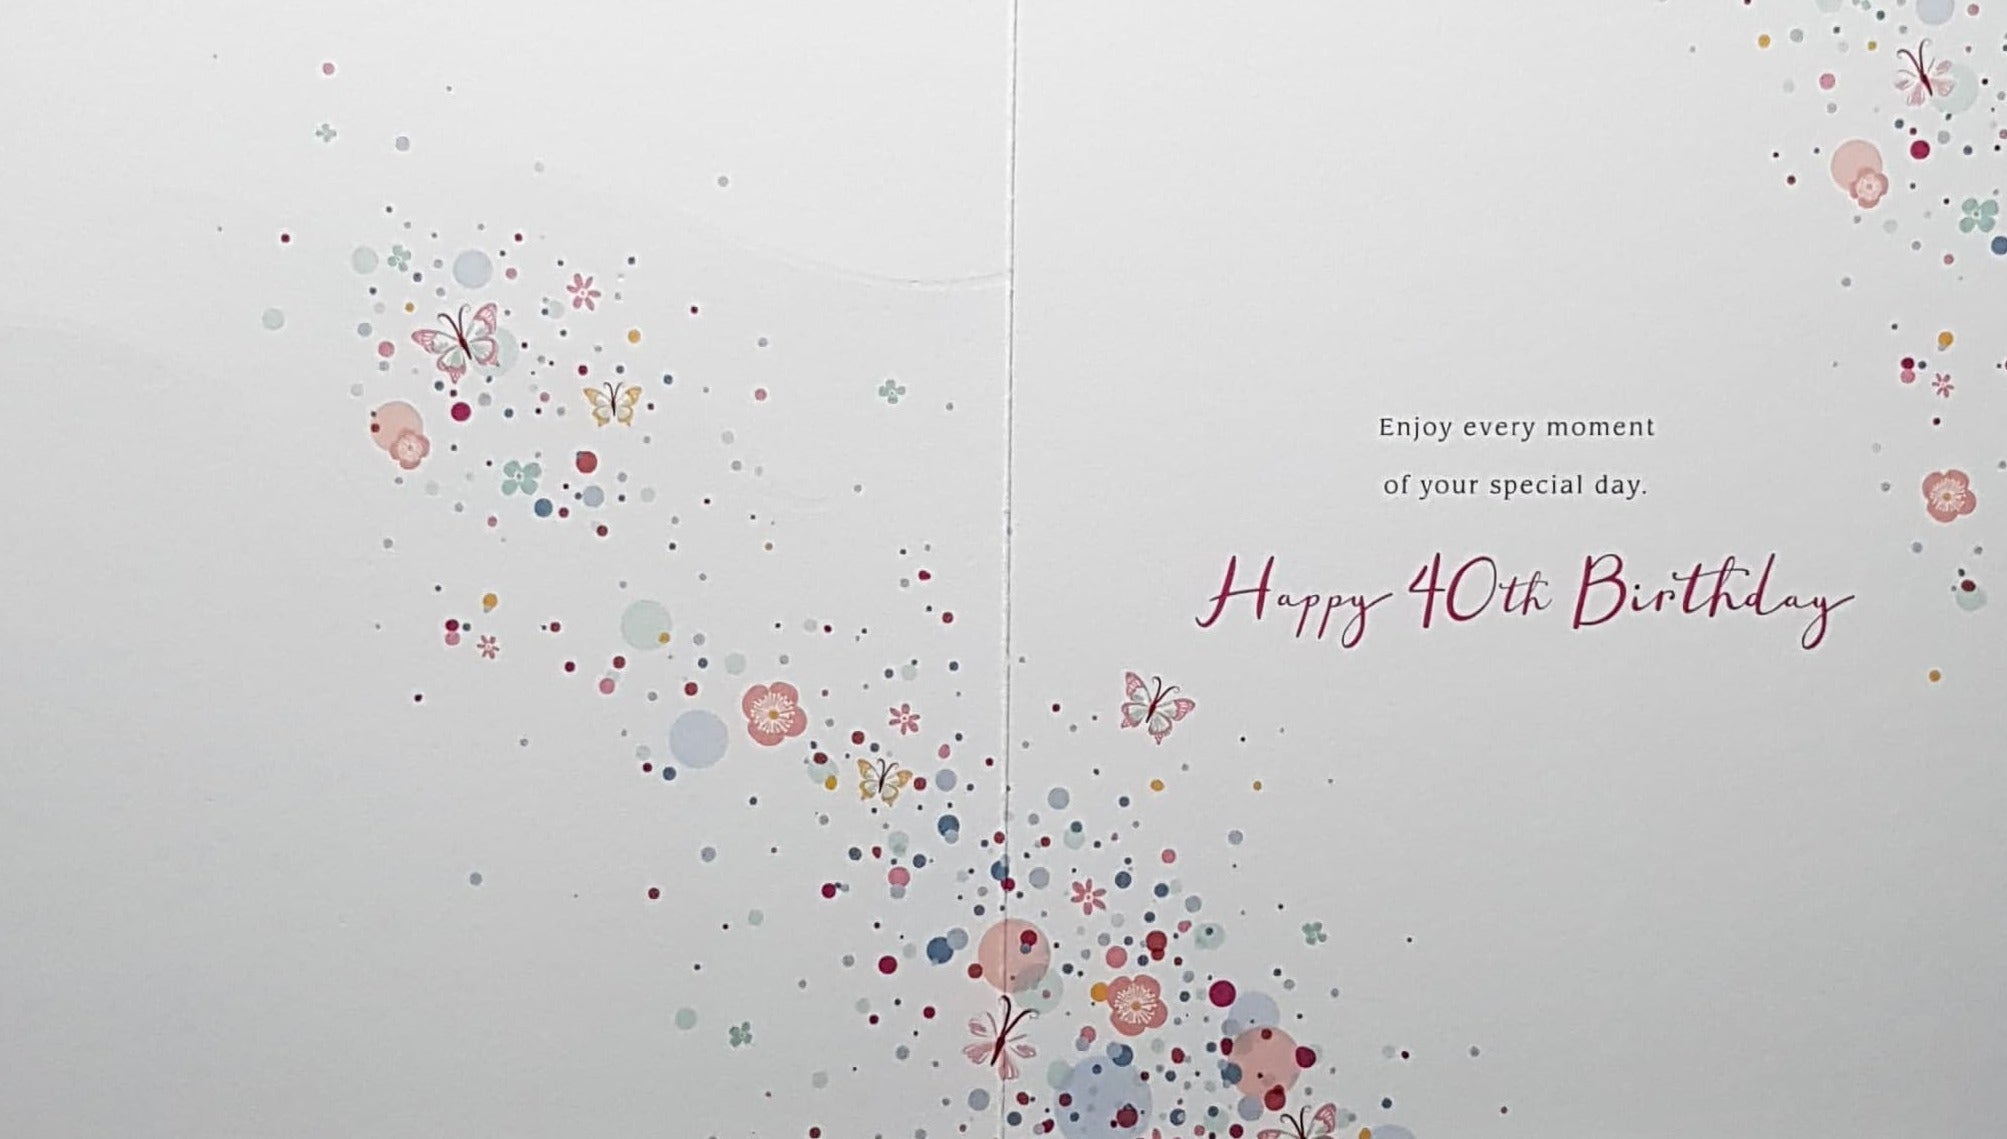 Age 40 Birthday Card - Sparkly Gold Font With Butterflies & Flowers